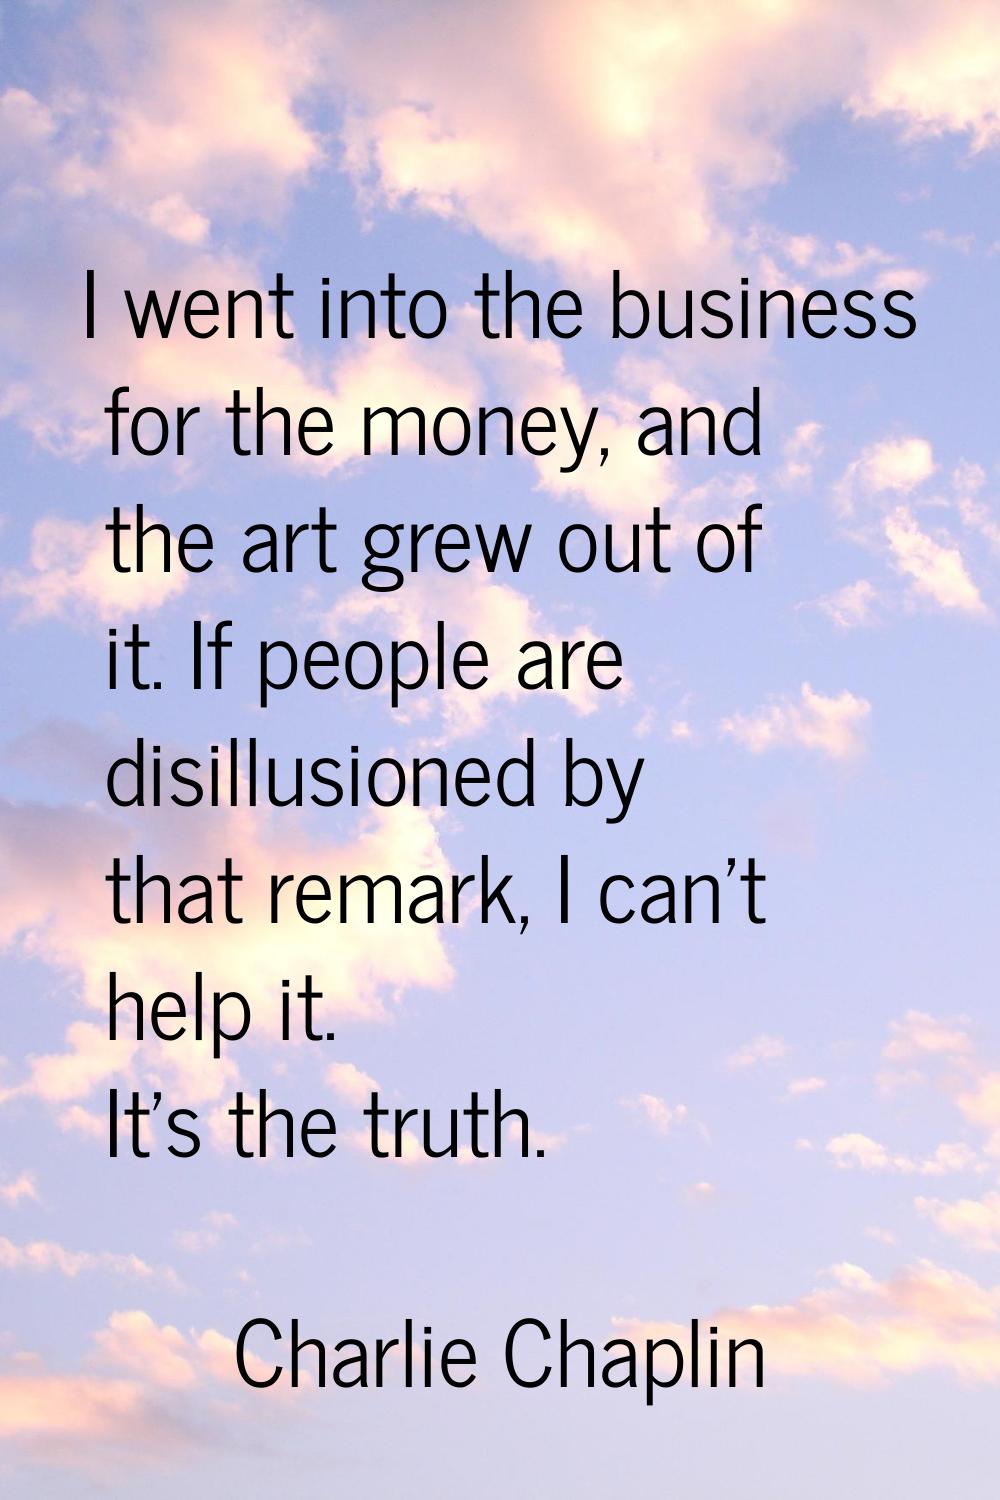 I went into the business for the money, and the art grew out of it. If people are disillusioned by 